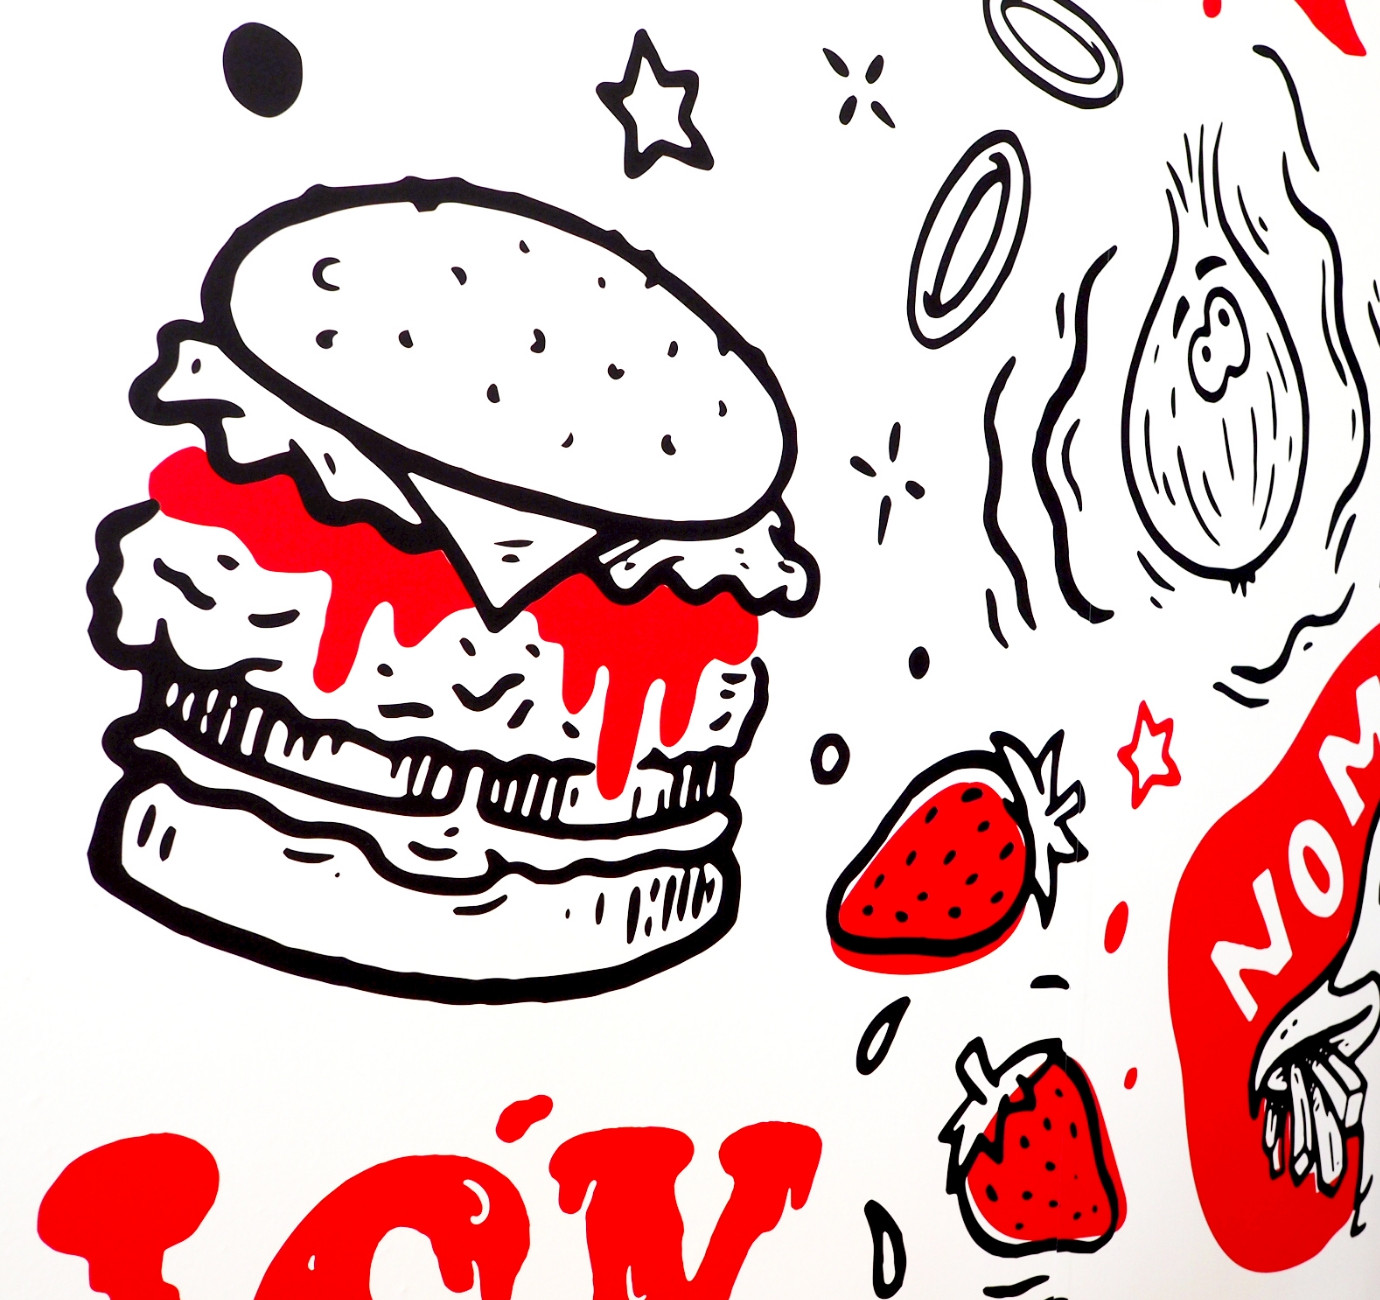 Lincoln College burger restaurant wall mural design by Root Studio